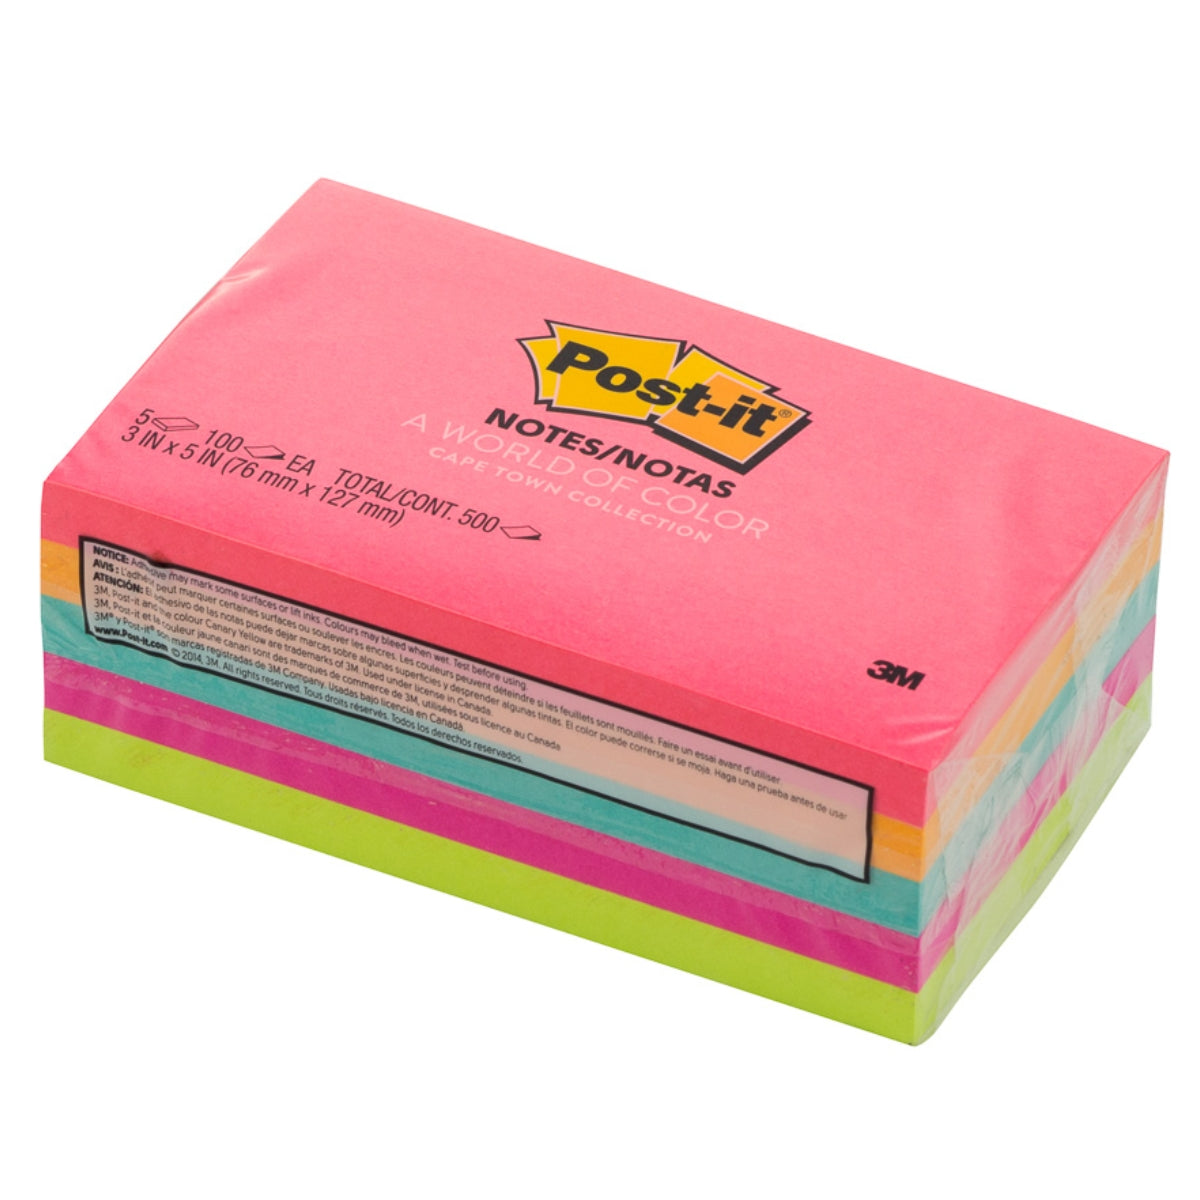 3M Post-it Notes 655-5PK, 3x5 inches, 5pads/pack, Neon Colors